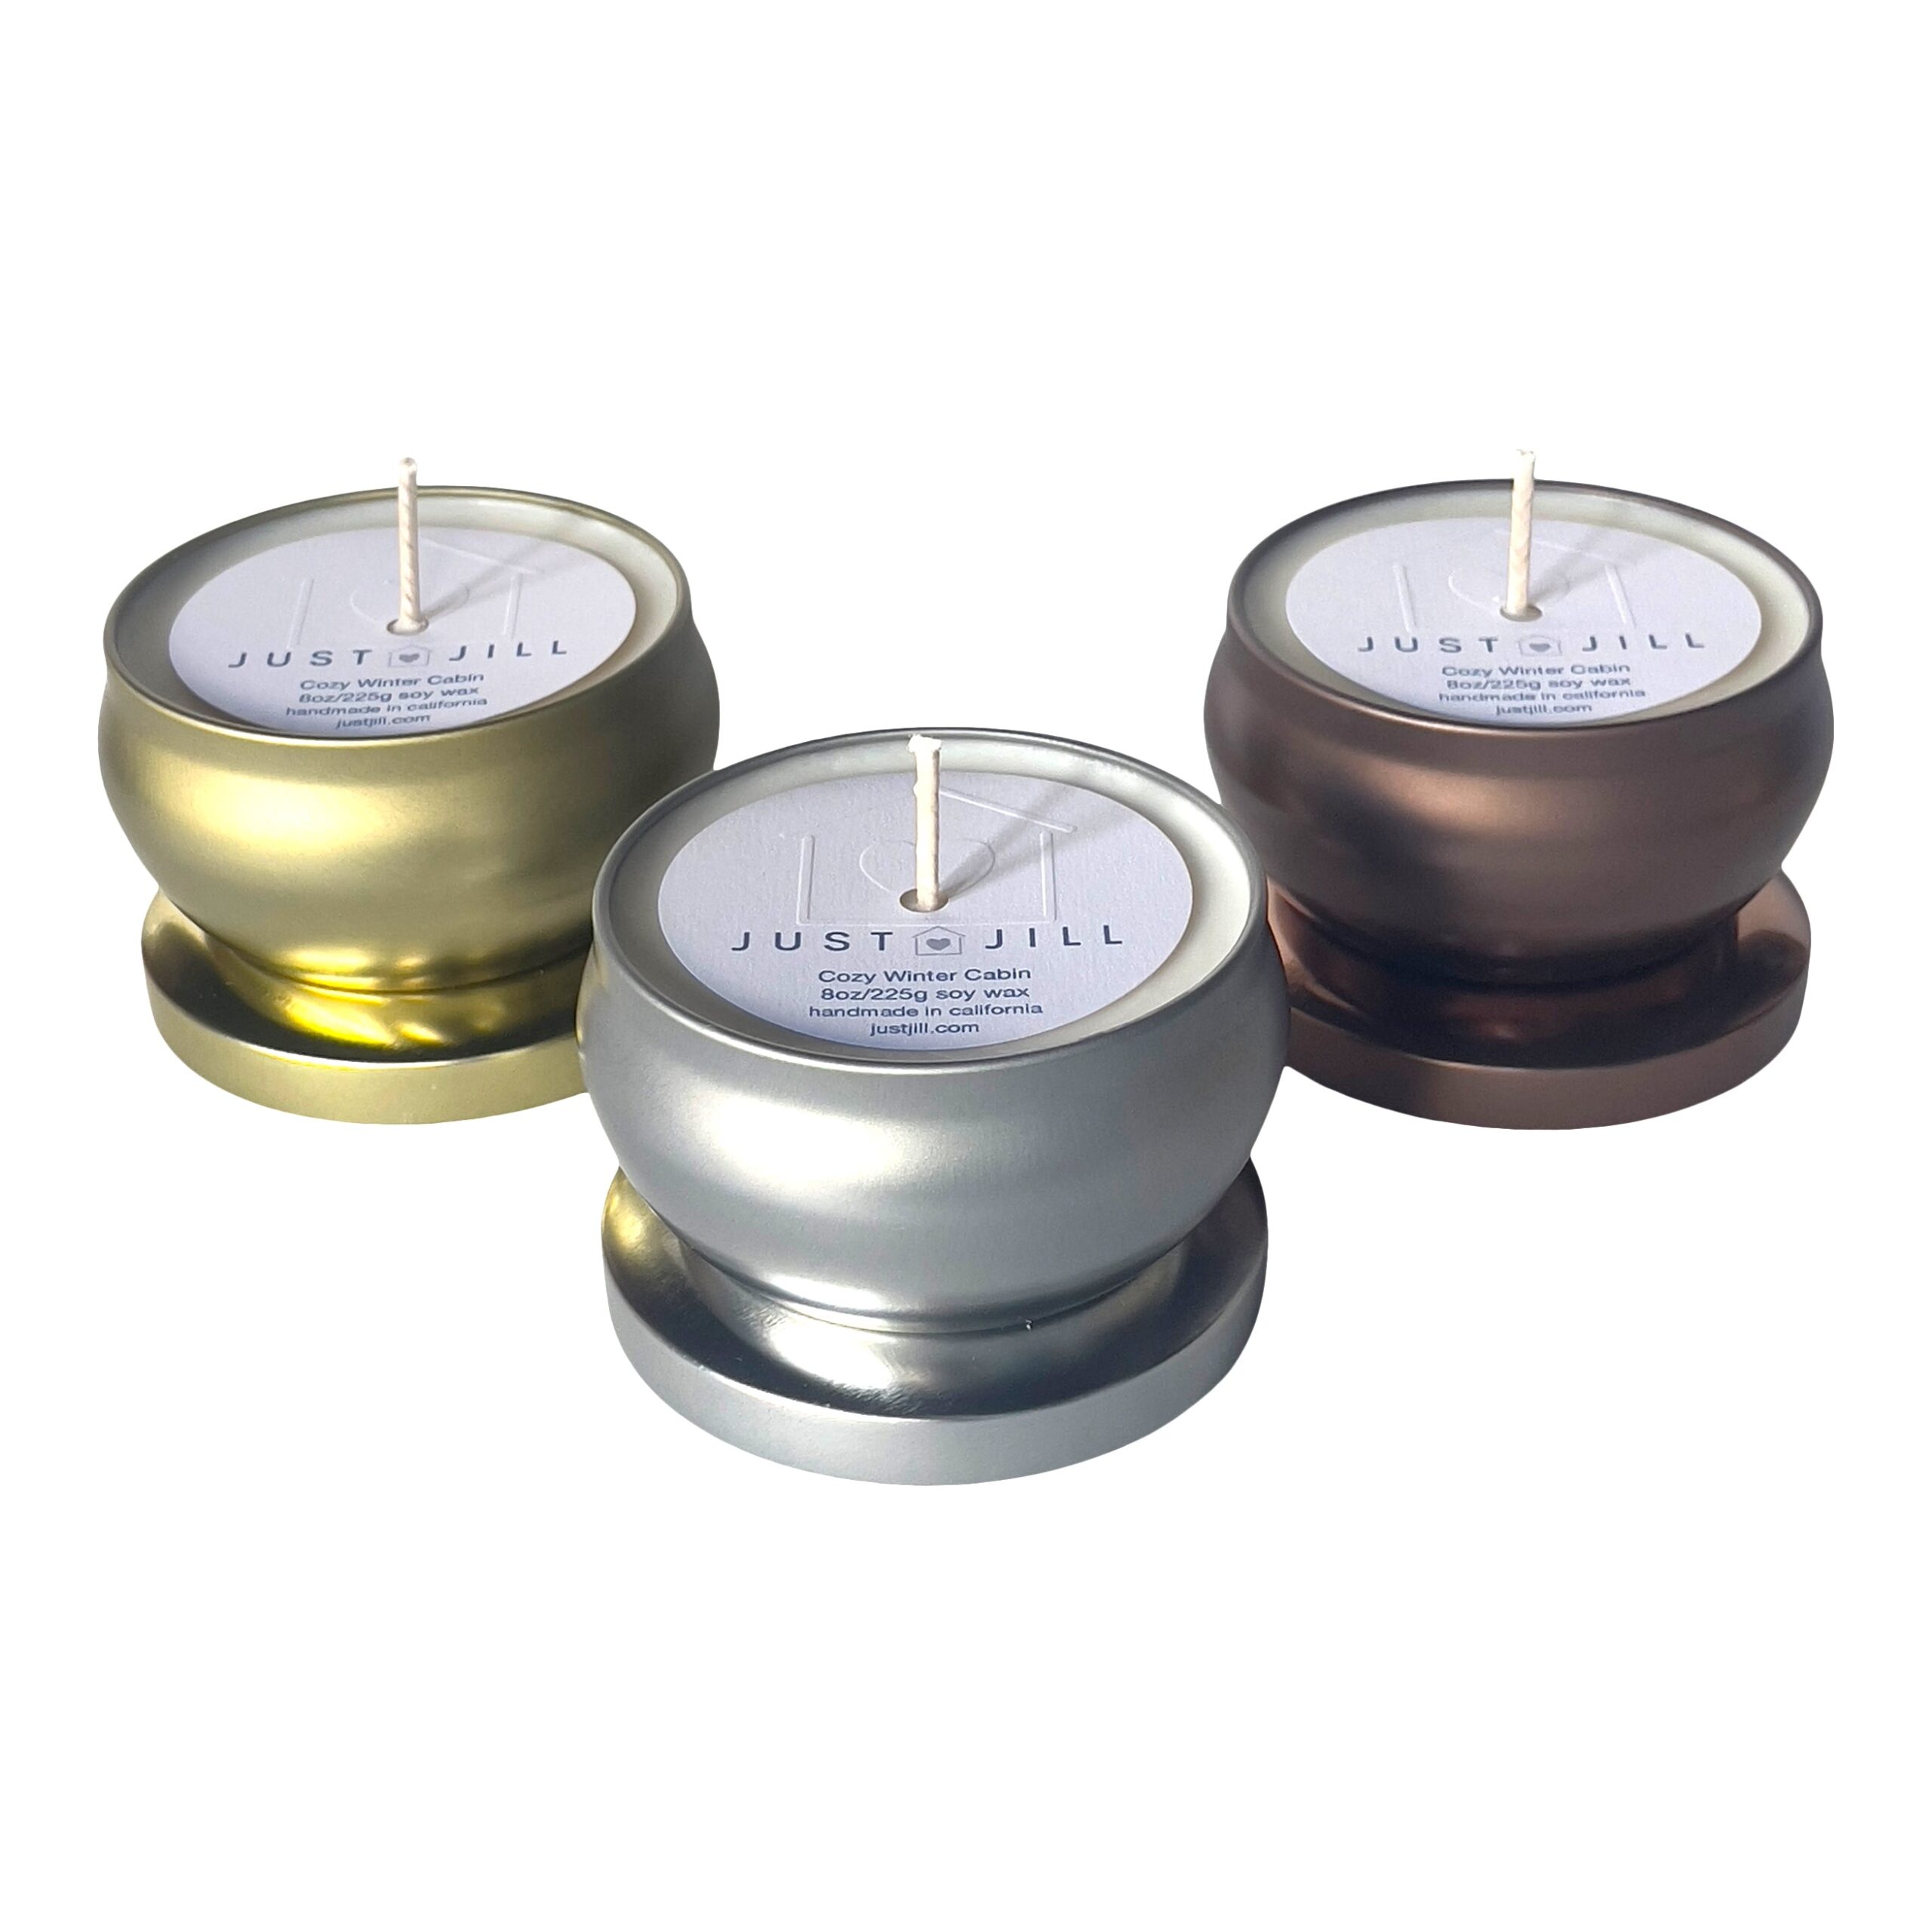 Just Jill Set of 3 Cozy Winter Cabin Candle Tins